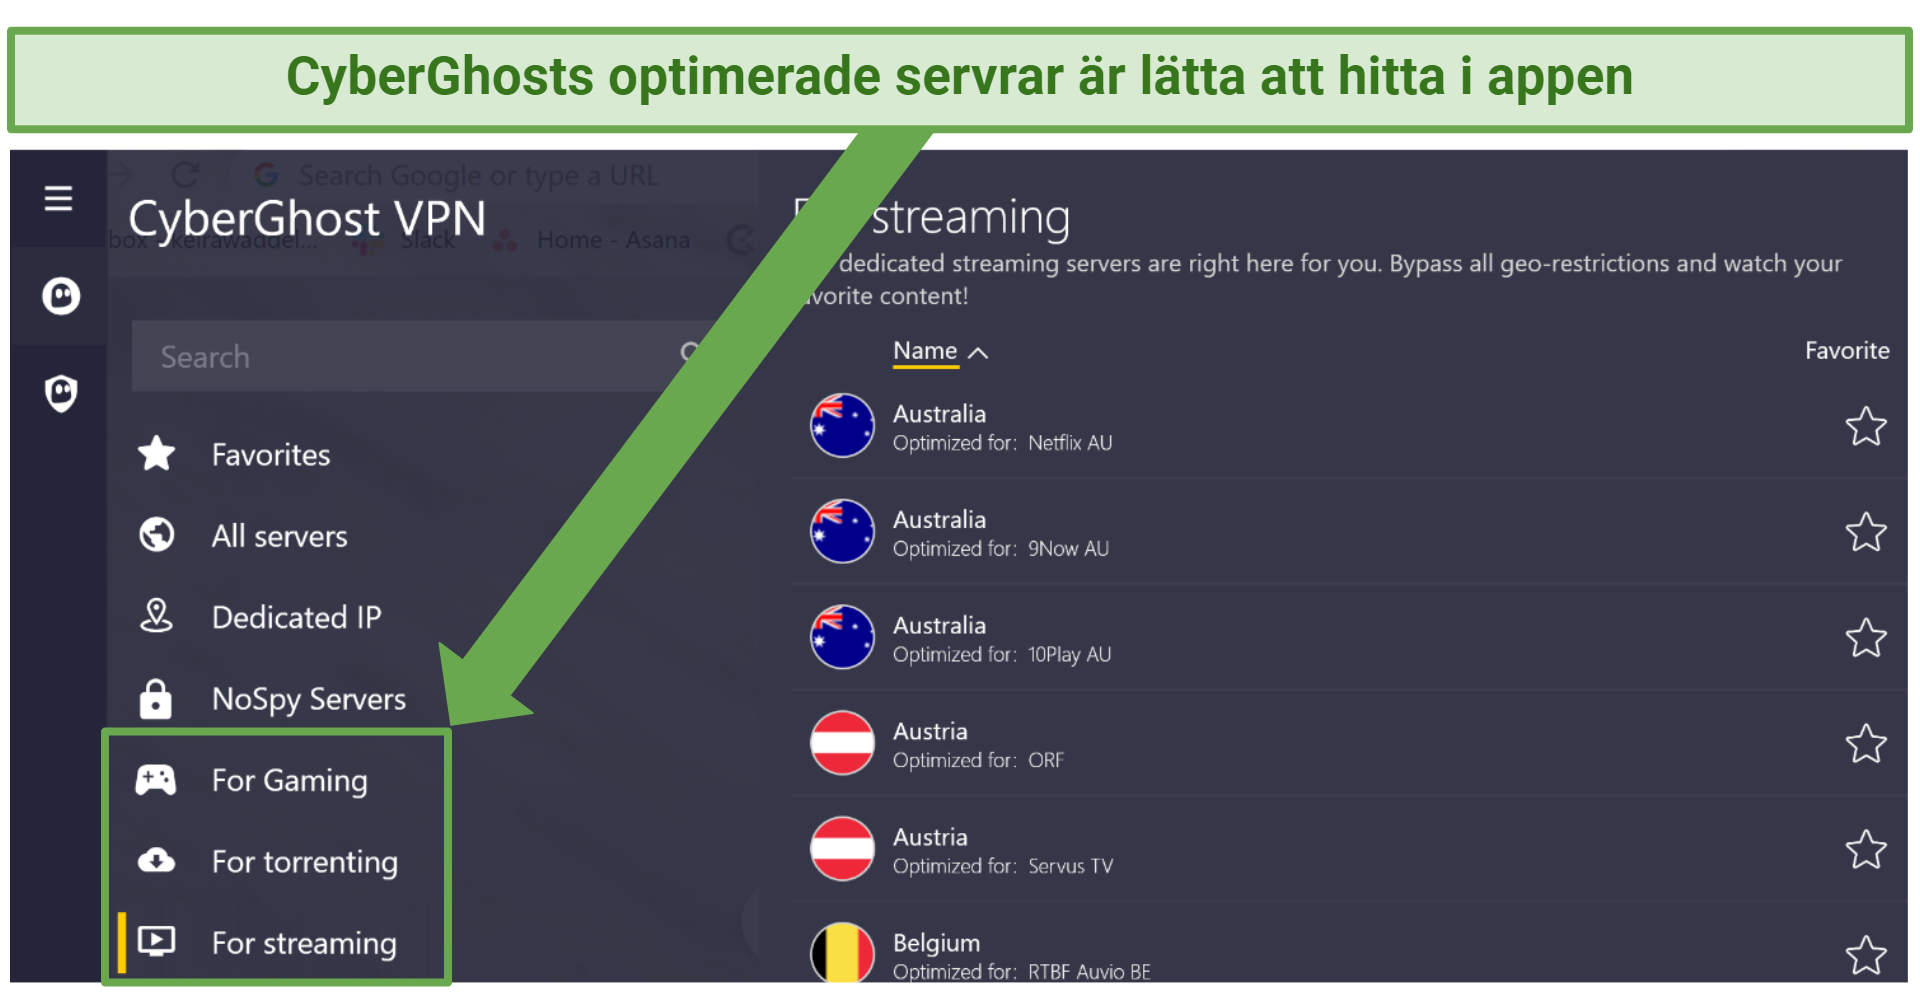 screenshot of CyberGhost's optimized servers in the app